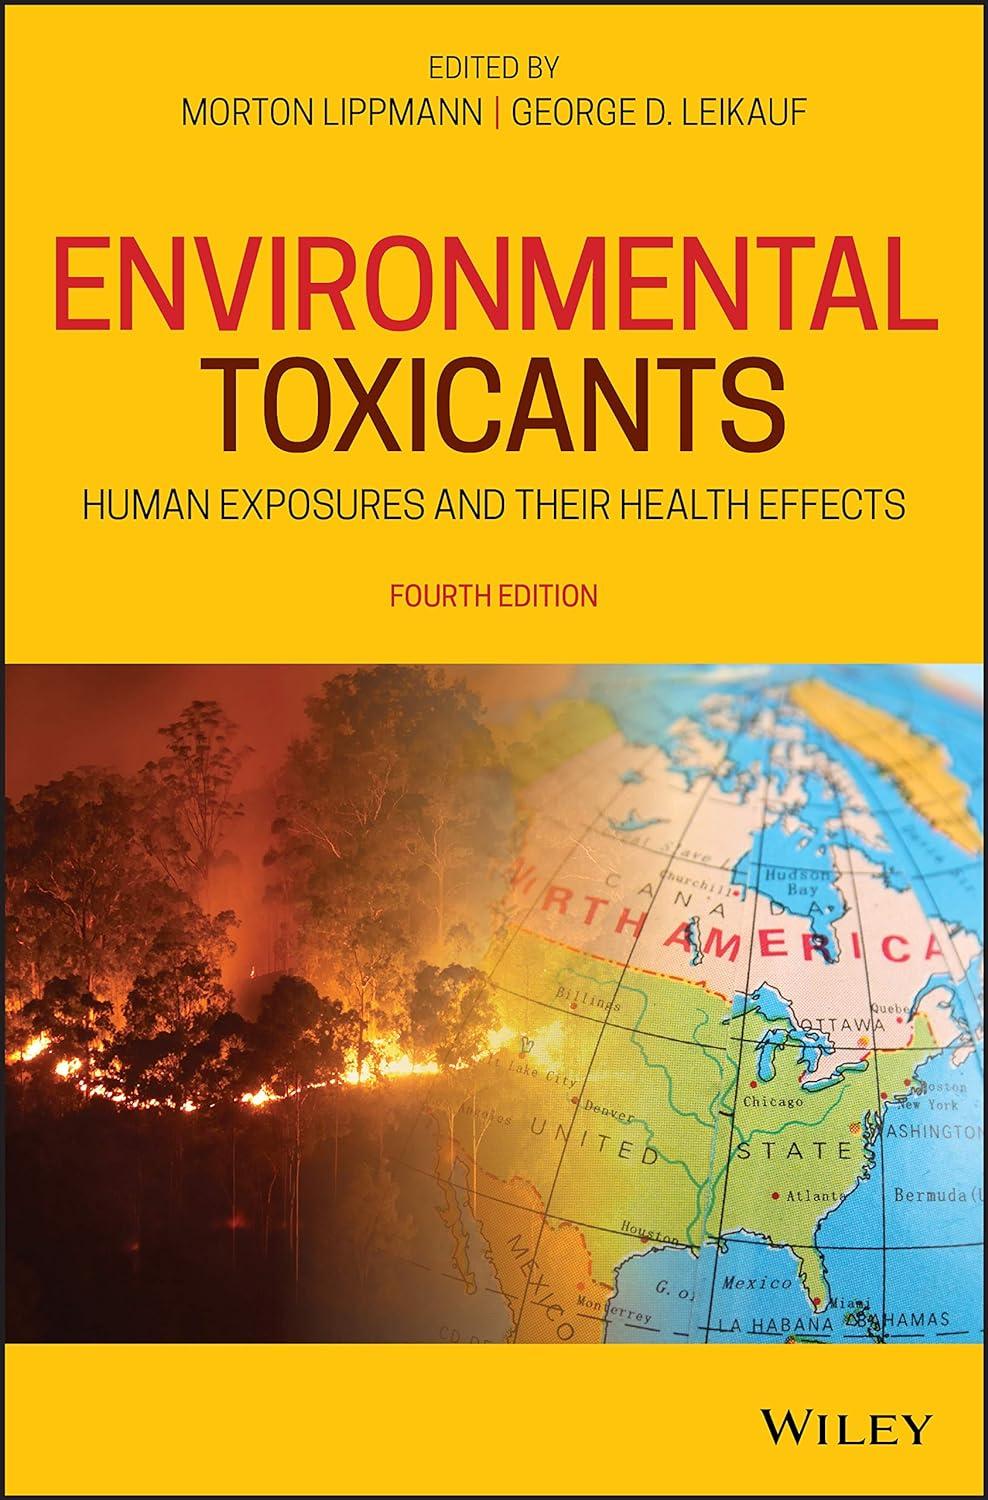 environmental toxicants human exposures and their health effects 4th edition morton lippmann, george d.